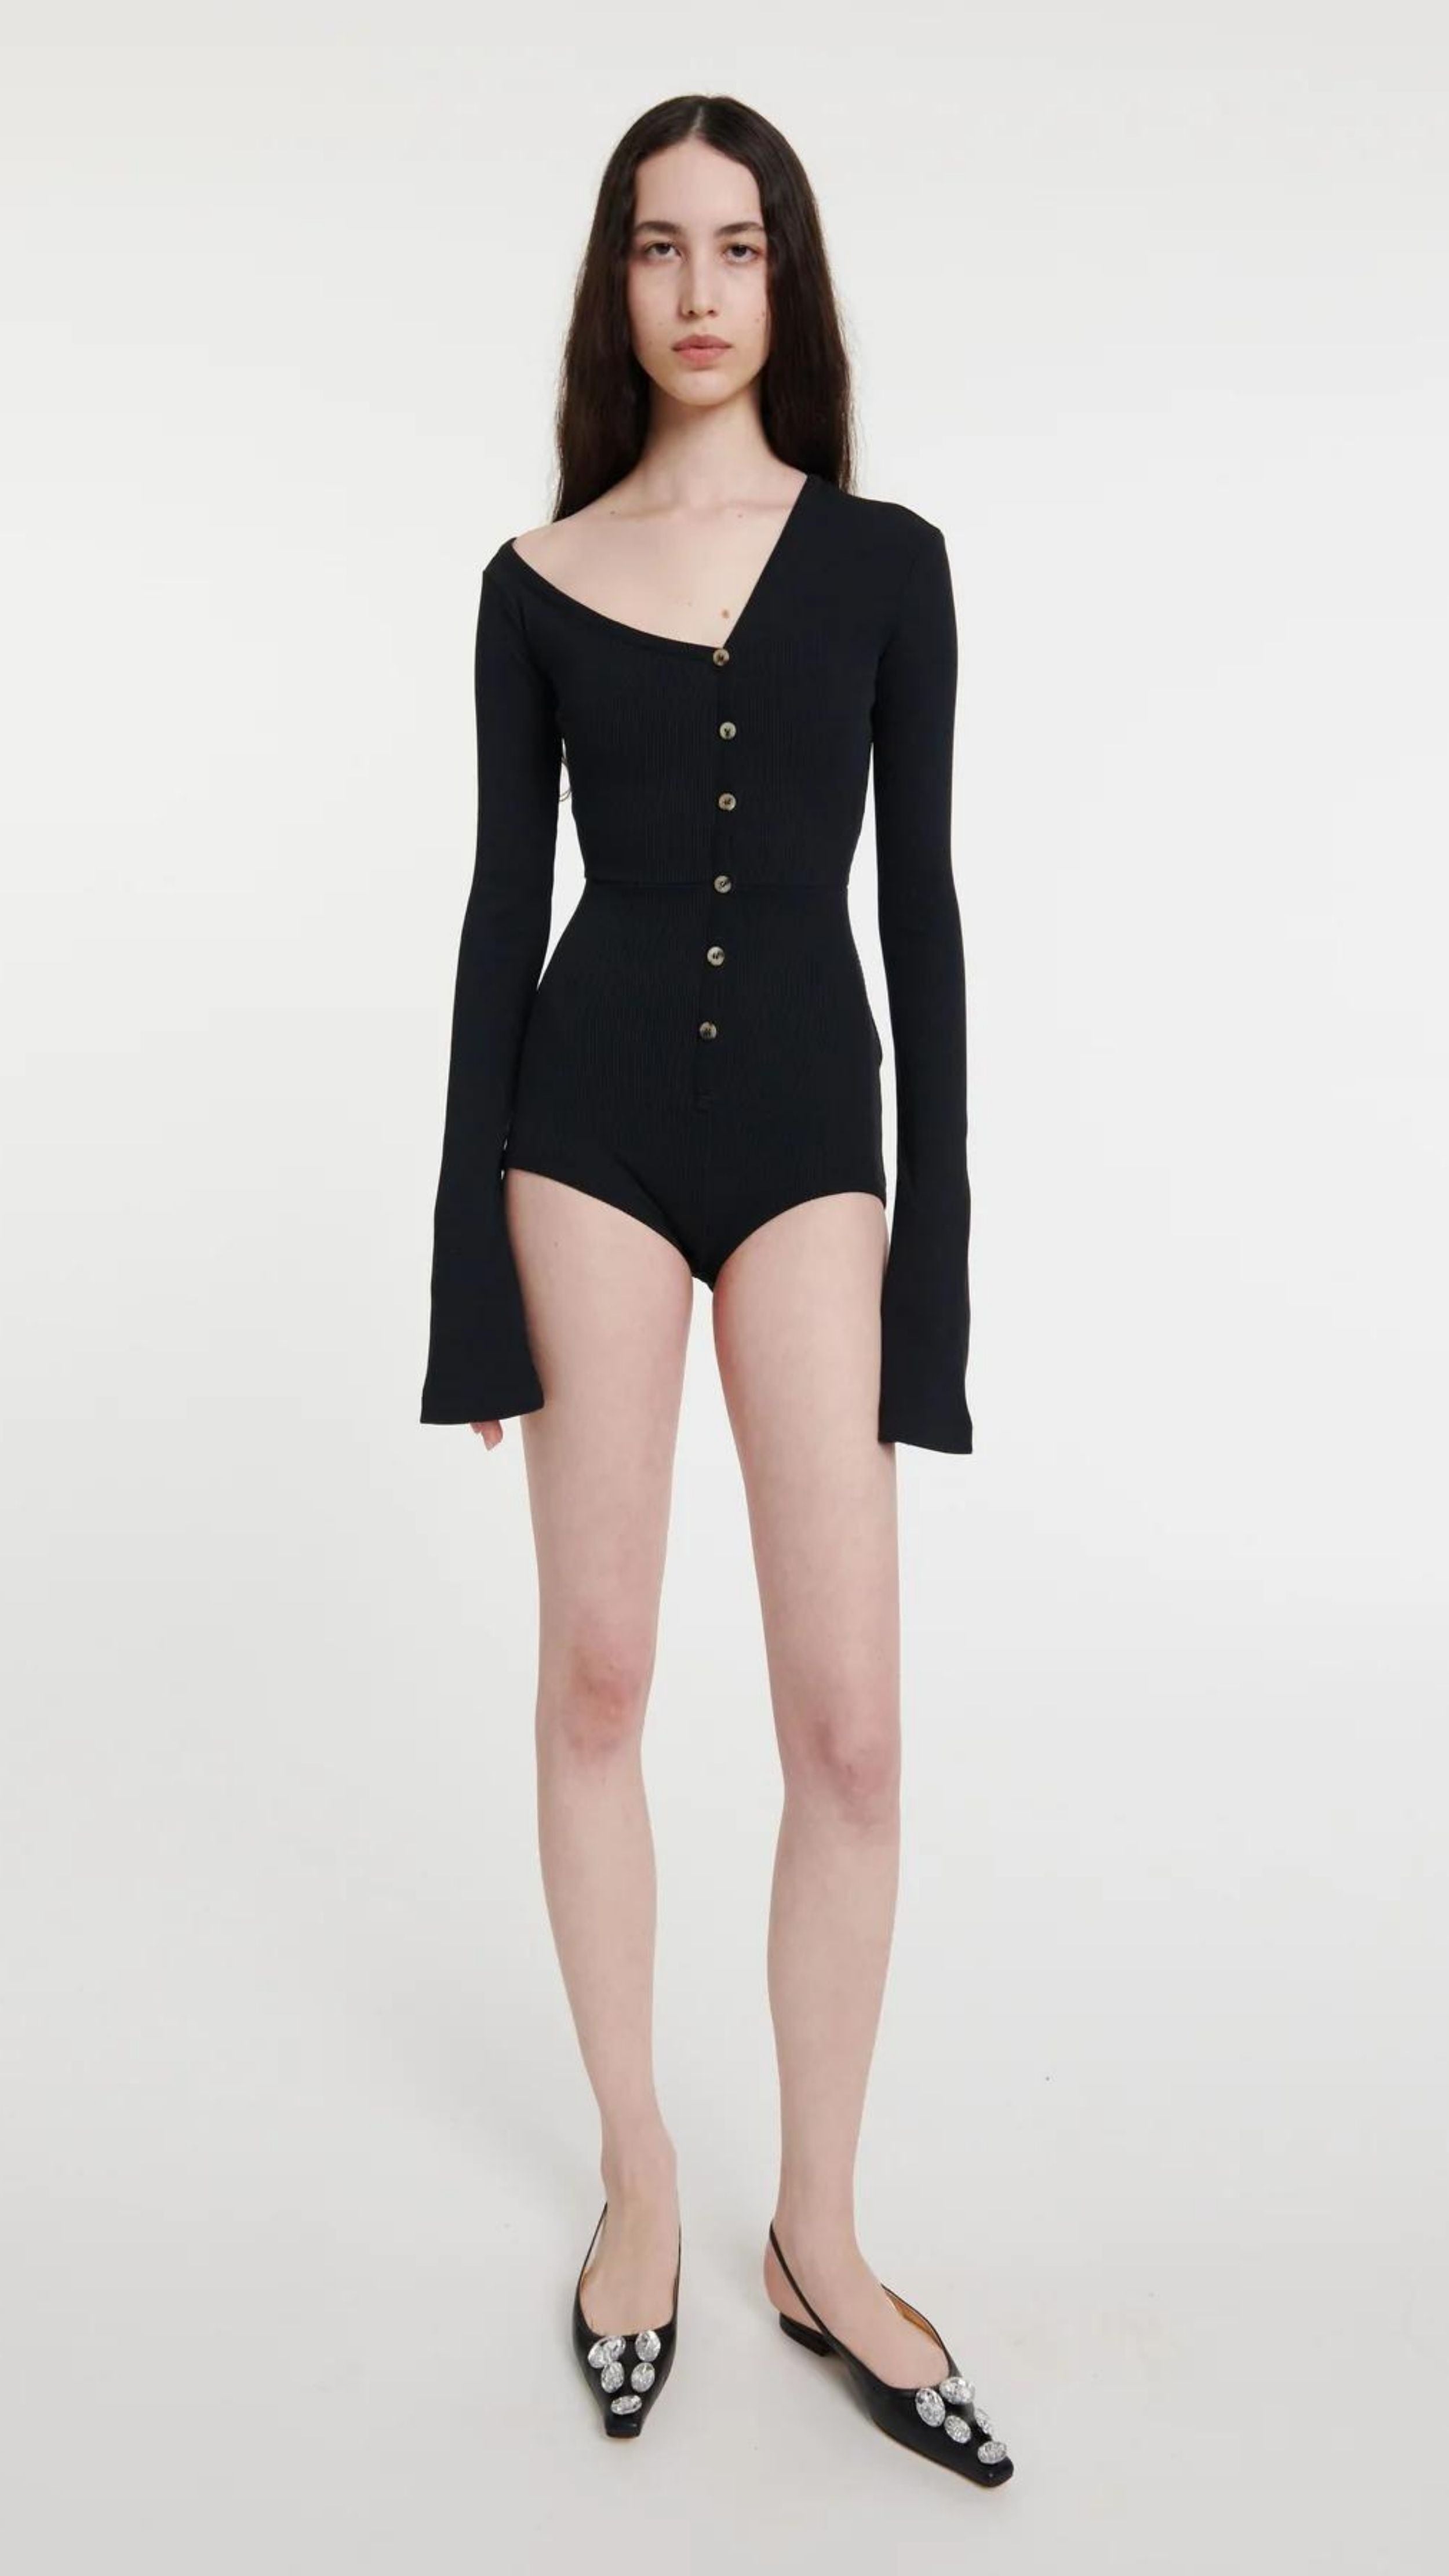 AWAKE Mode Body Suit with Asymmetrical Collar in Black. 100% Cotton top with an asymmetrical collar. Slightly off shoulder on one side. Buttons up the front and extra long sleeves. Shown on model facing front.